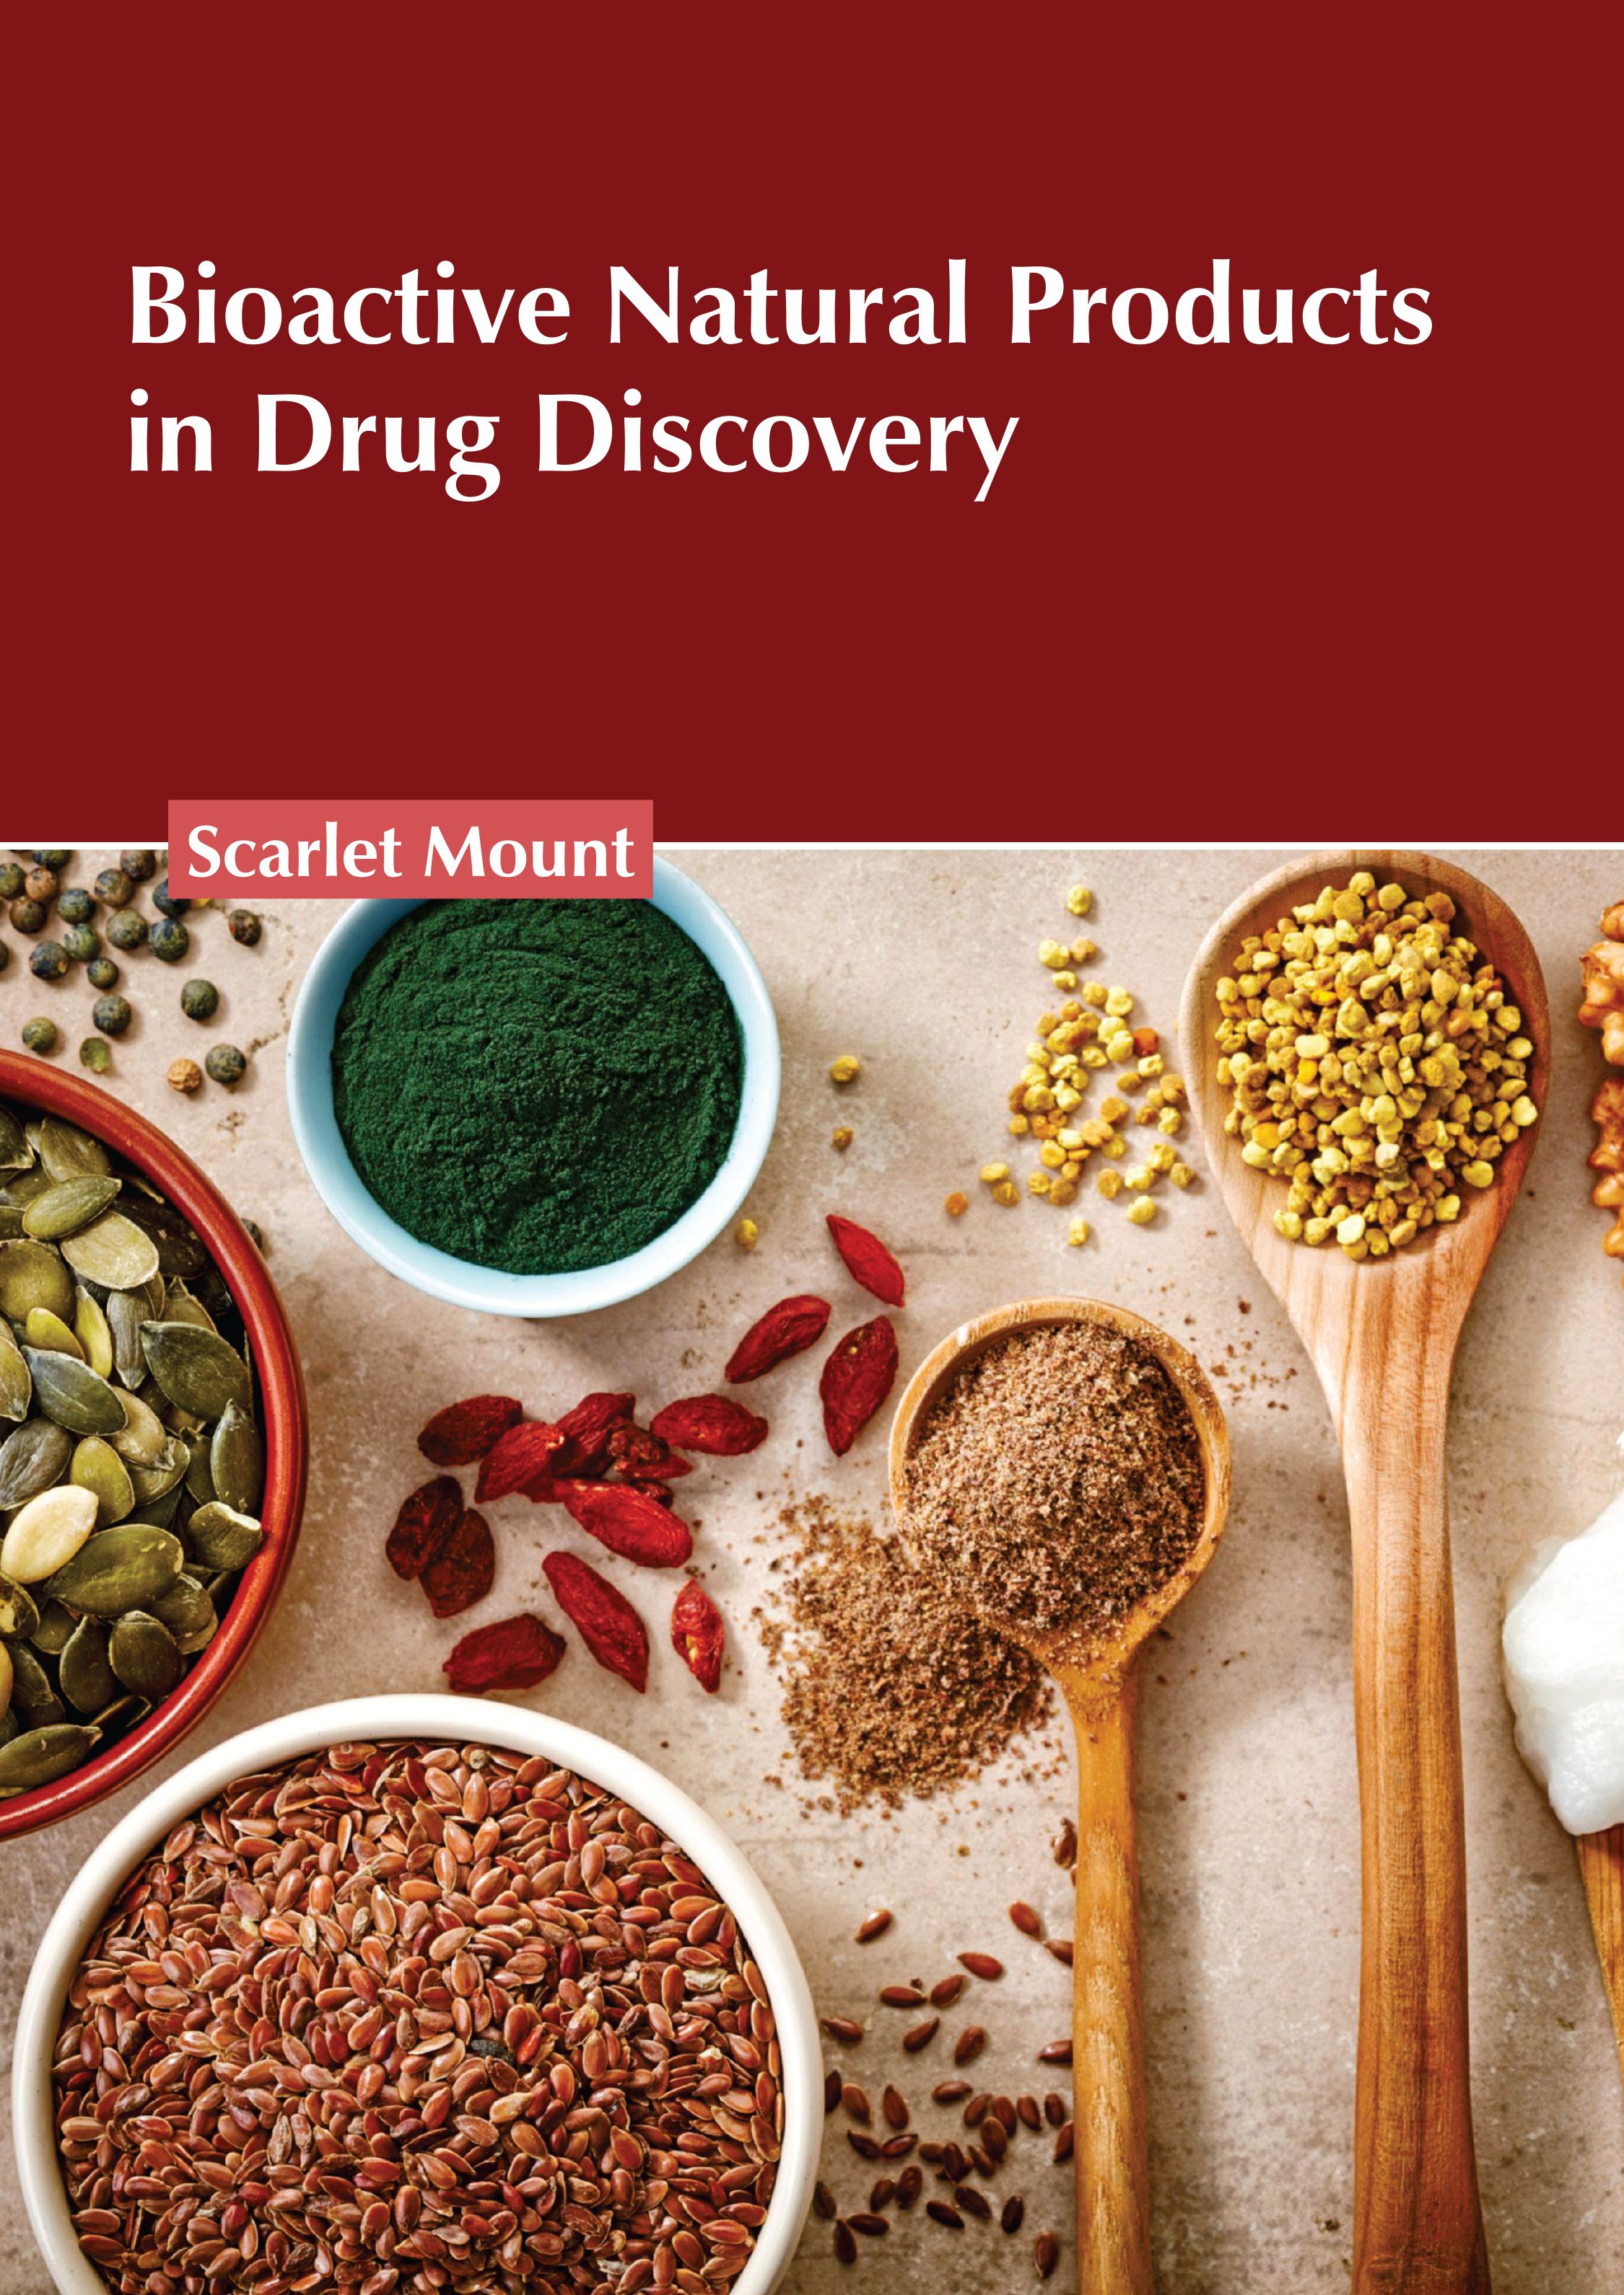 

exclusive-publishers/american-medical-publishers/bioactive-natural-products-in-drug-discovery-9781639279173